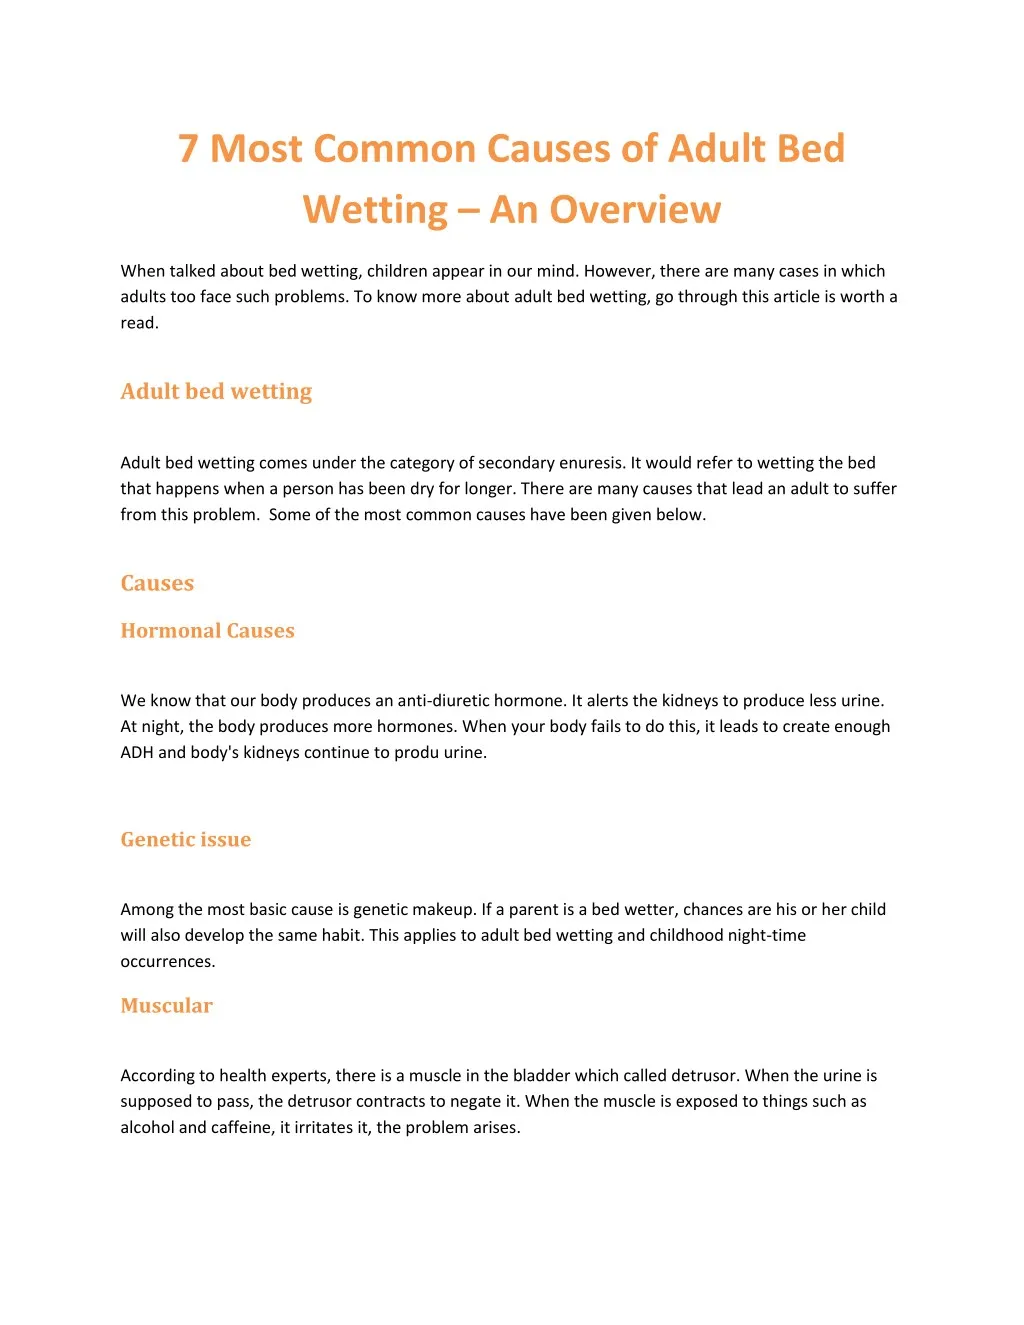 7 most common causes of adult bed wetting